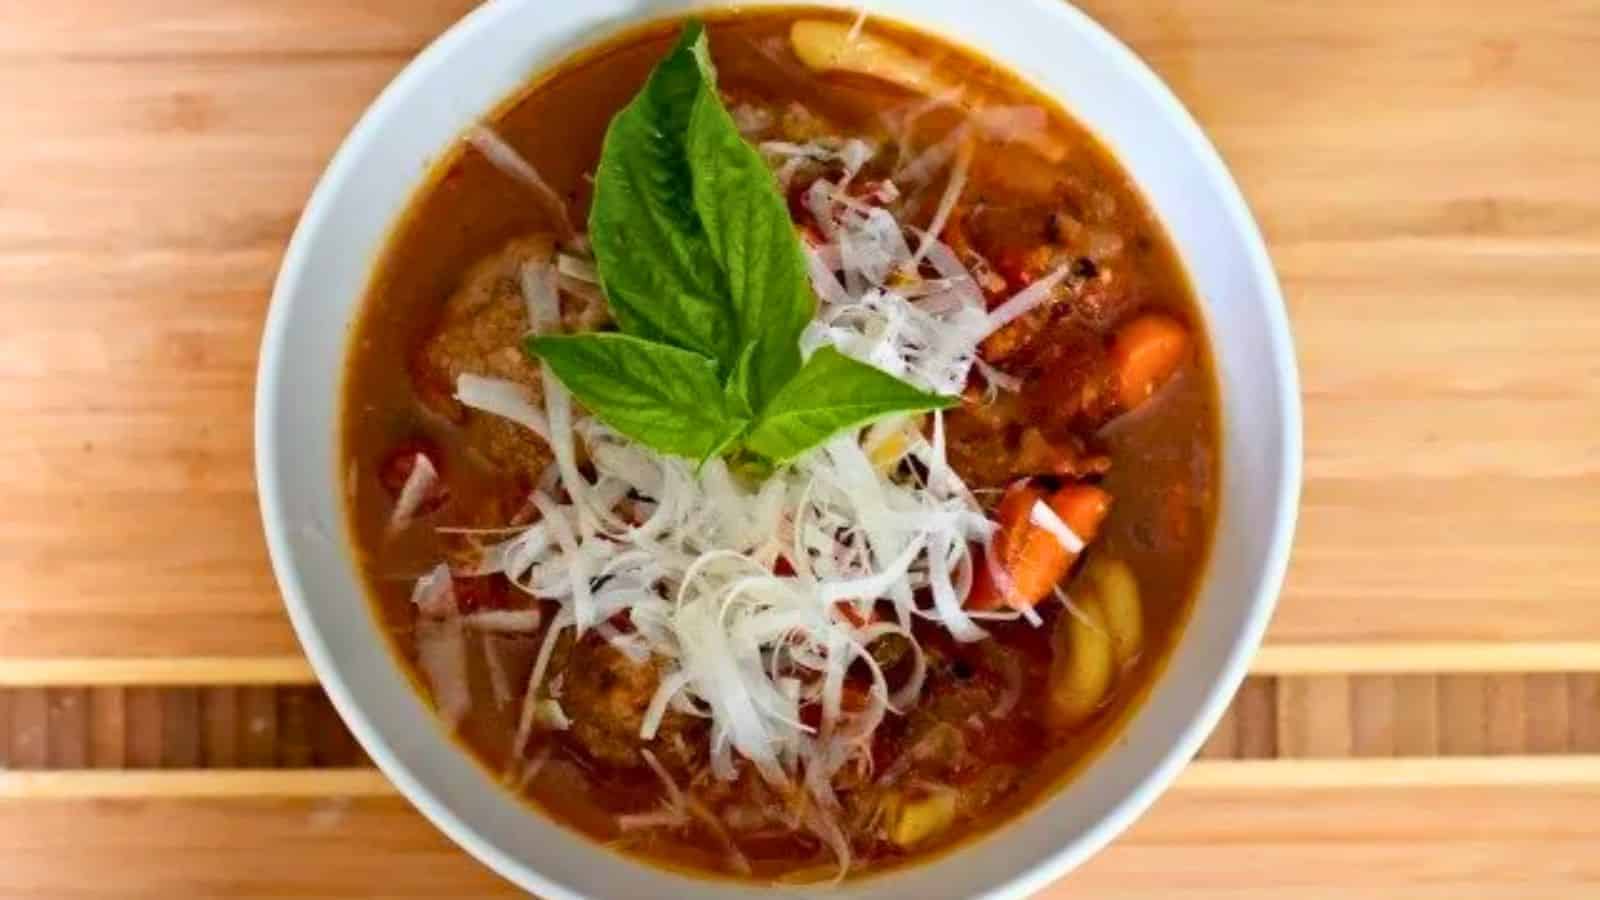 Image shows A bowl of italian meatball soup with a basil leaf on top.